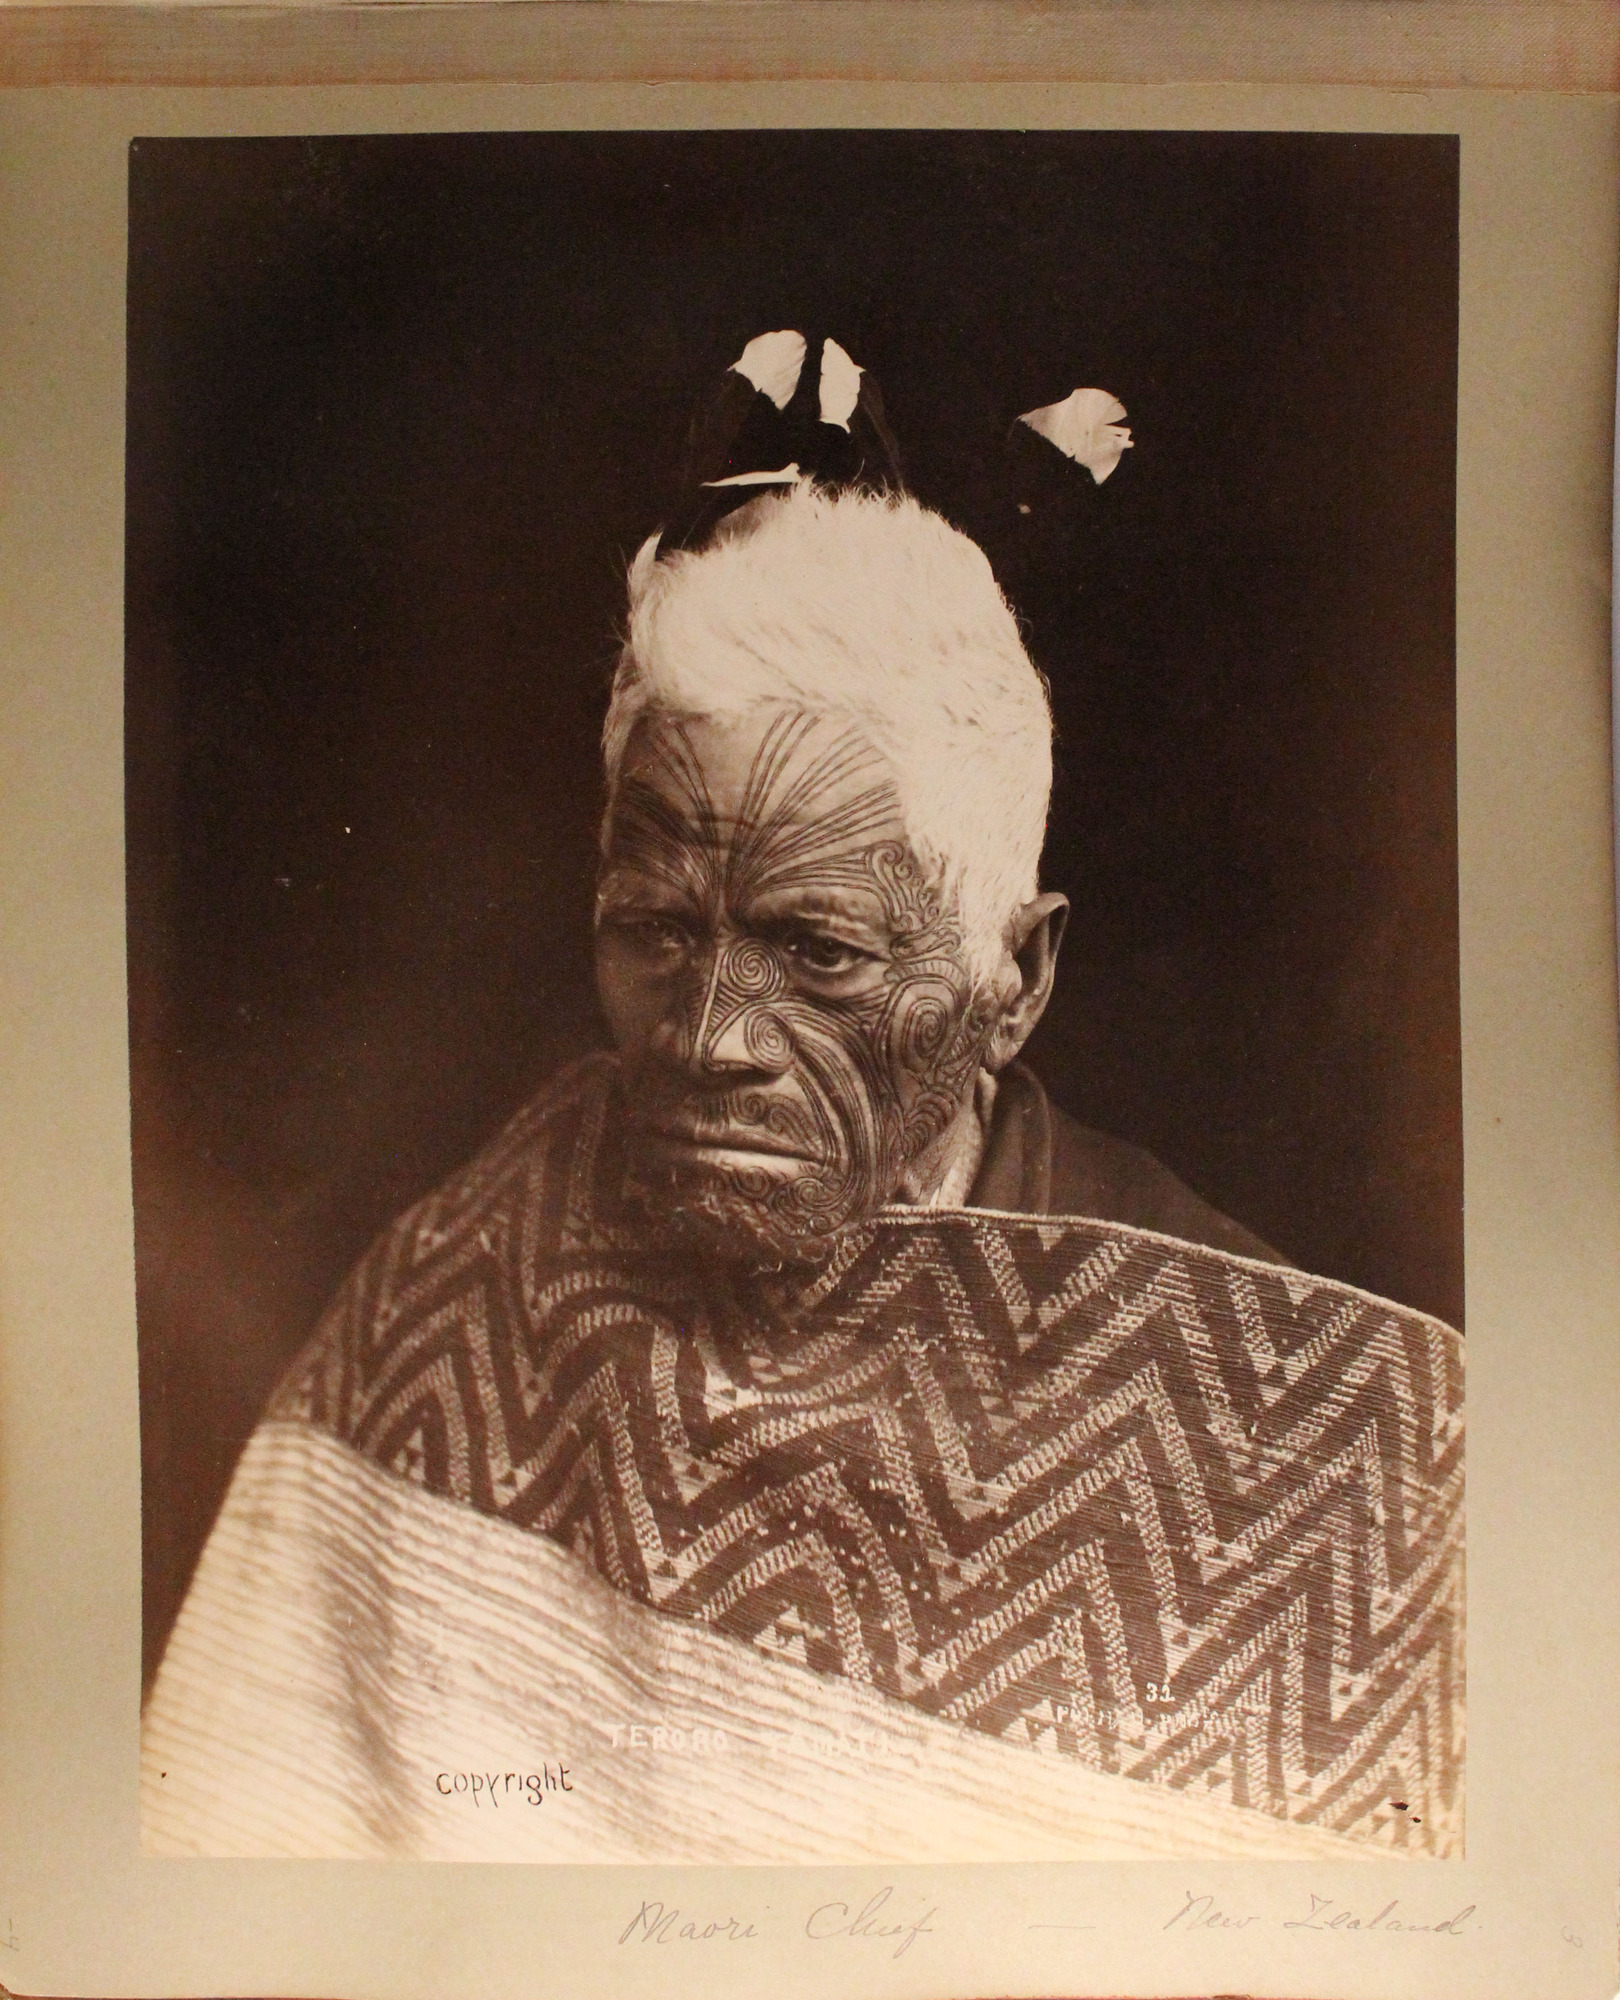 Old Maori man with traditional face tattoos, feathers in hair and stiff cloak.